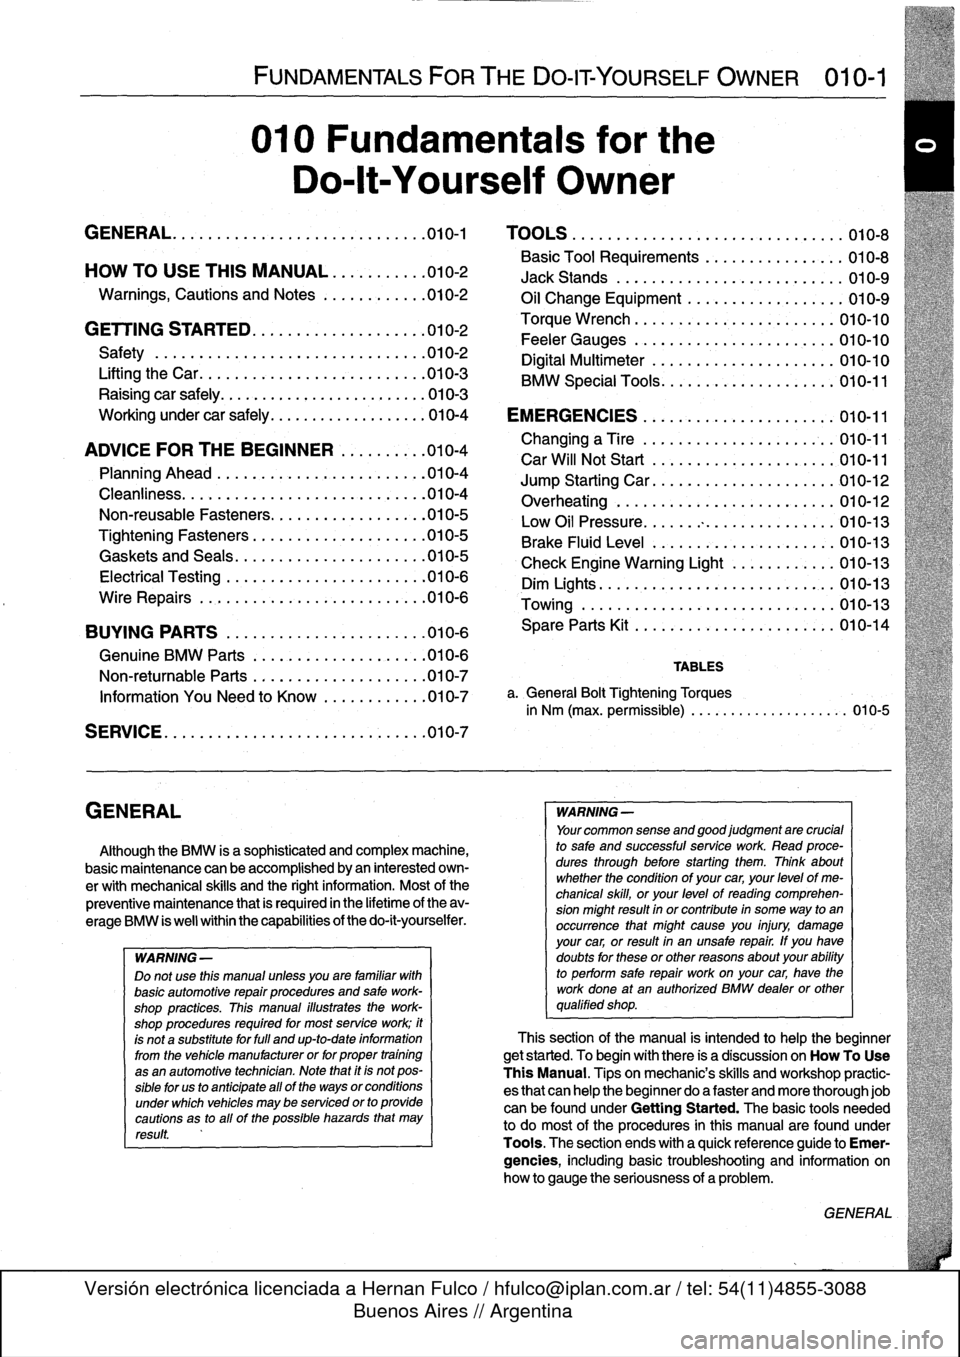 BMW M3 1993 E36 Workshop Manual 
GENERAL

FUNDAMENTALS
FORTHE
DO-IT
YOURSELF
OWNER

	

010-1

010
Fundamentals
for
the

Do-lt-Yourself
Owner

GENERAL
.......
.
.
.
......
.
.........
.
.
.010-1

	

TOOLS
.
.
...
.
............
.
...